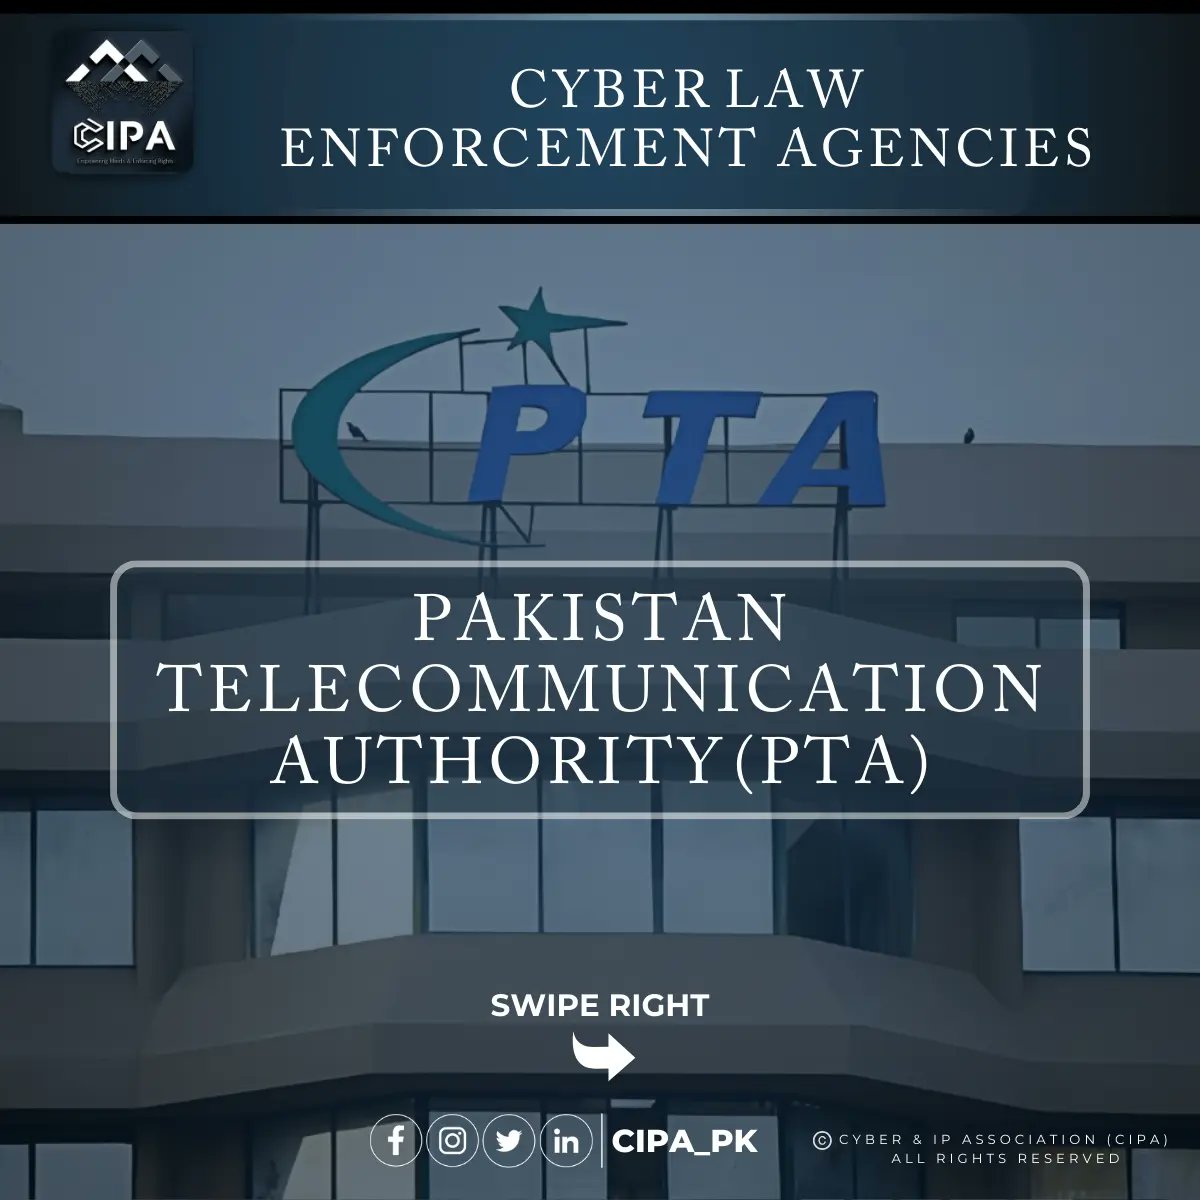 PTA: Safeguarding digital frontiers through cyber laws, ensuring a secure cyberspace for all Pakistani citizens.

#Cipa_pk #dataprotection #digitalrights #intellectualpropertyrights #cyber #PTA #Digitallaws #Pakistan